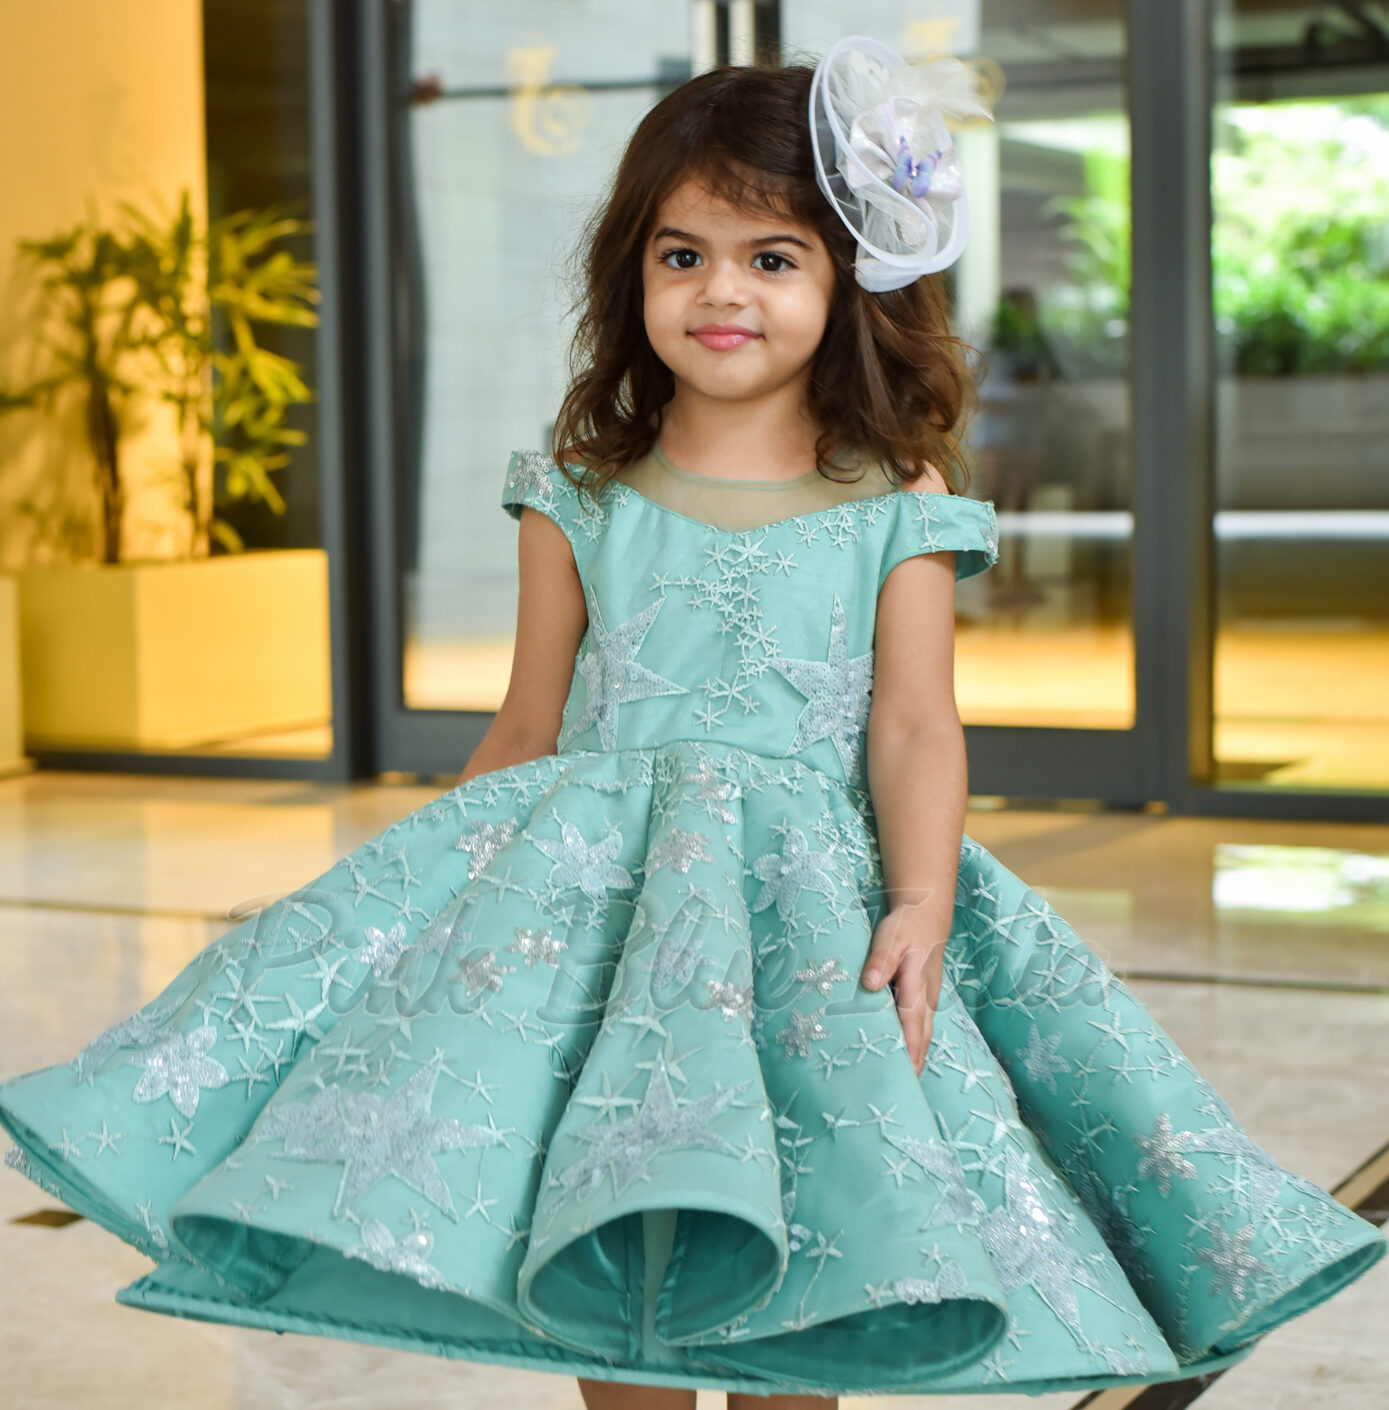 Cutedoll Wine Color Net Embroidered Kids Baby Frock Dress — cutedoll